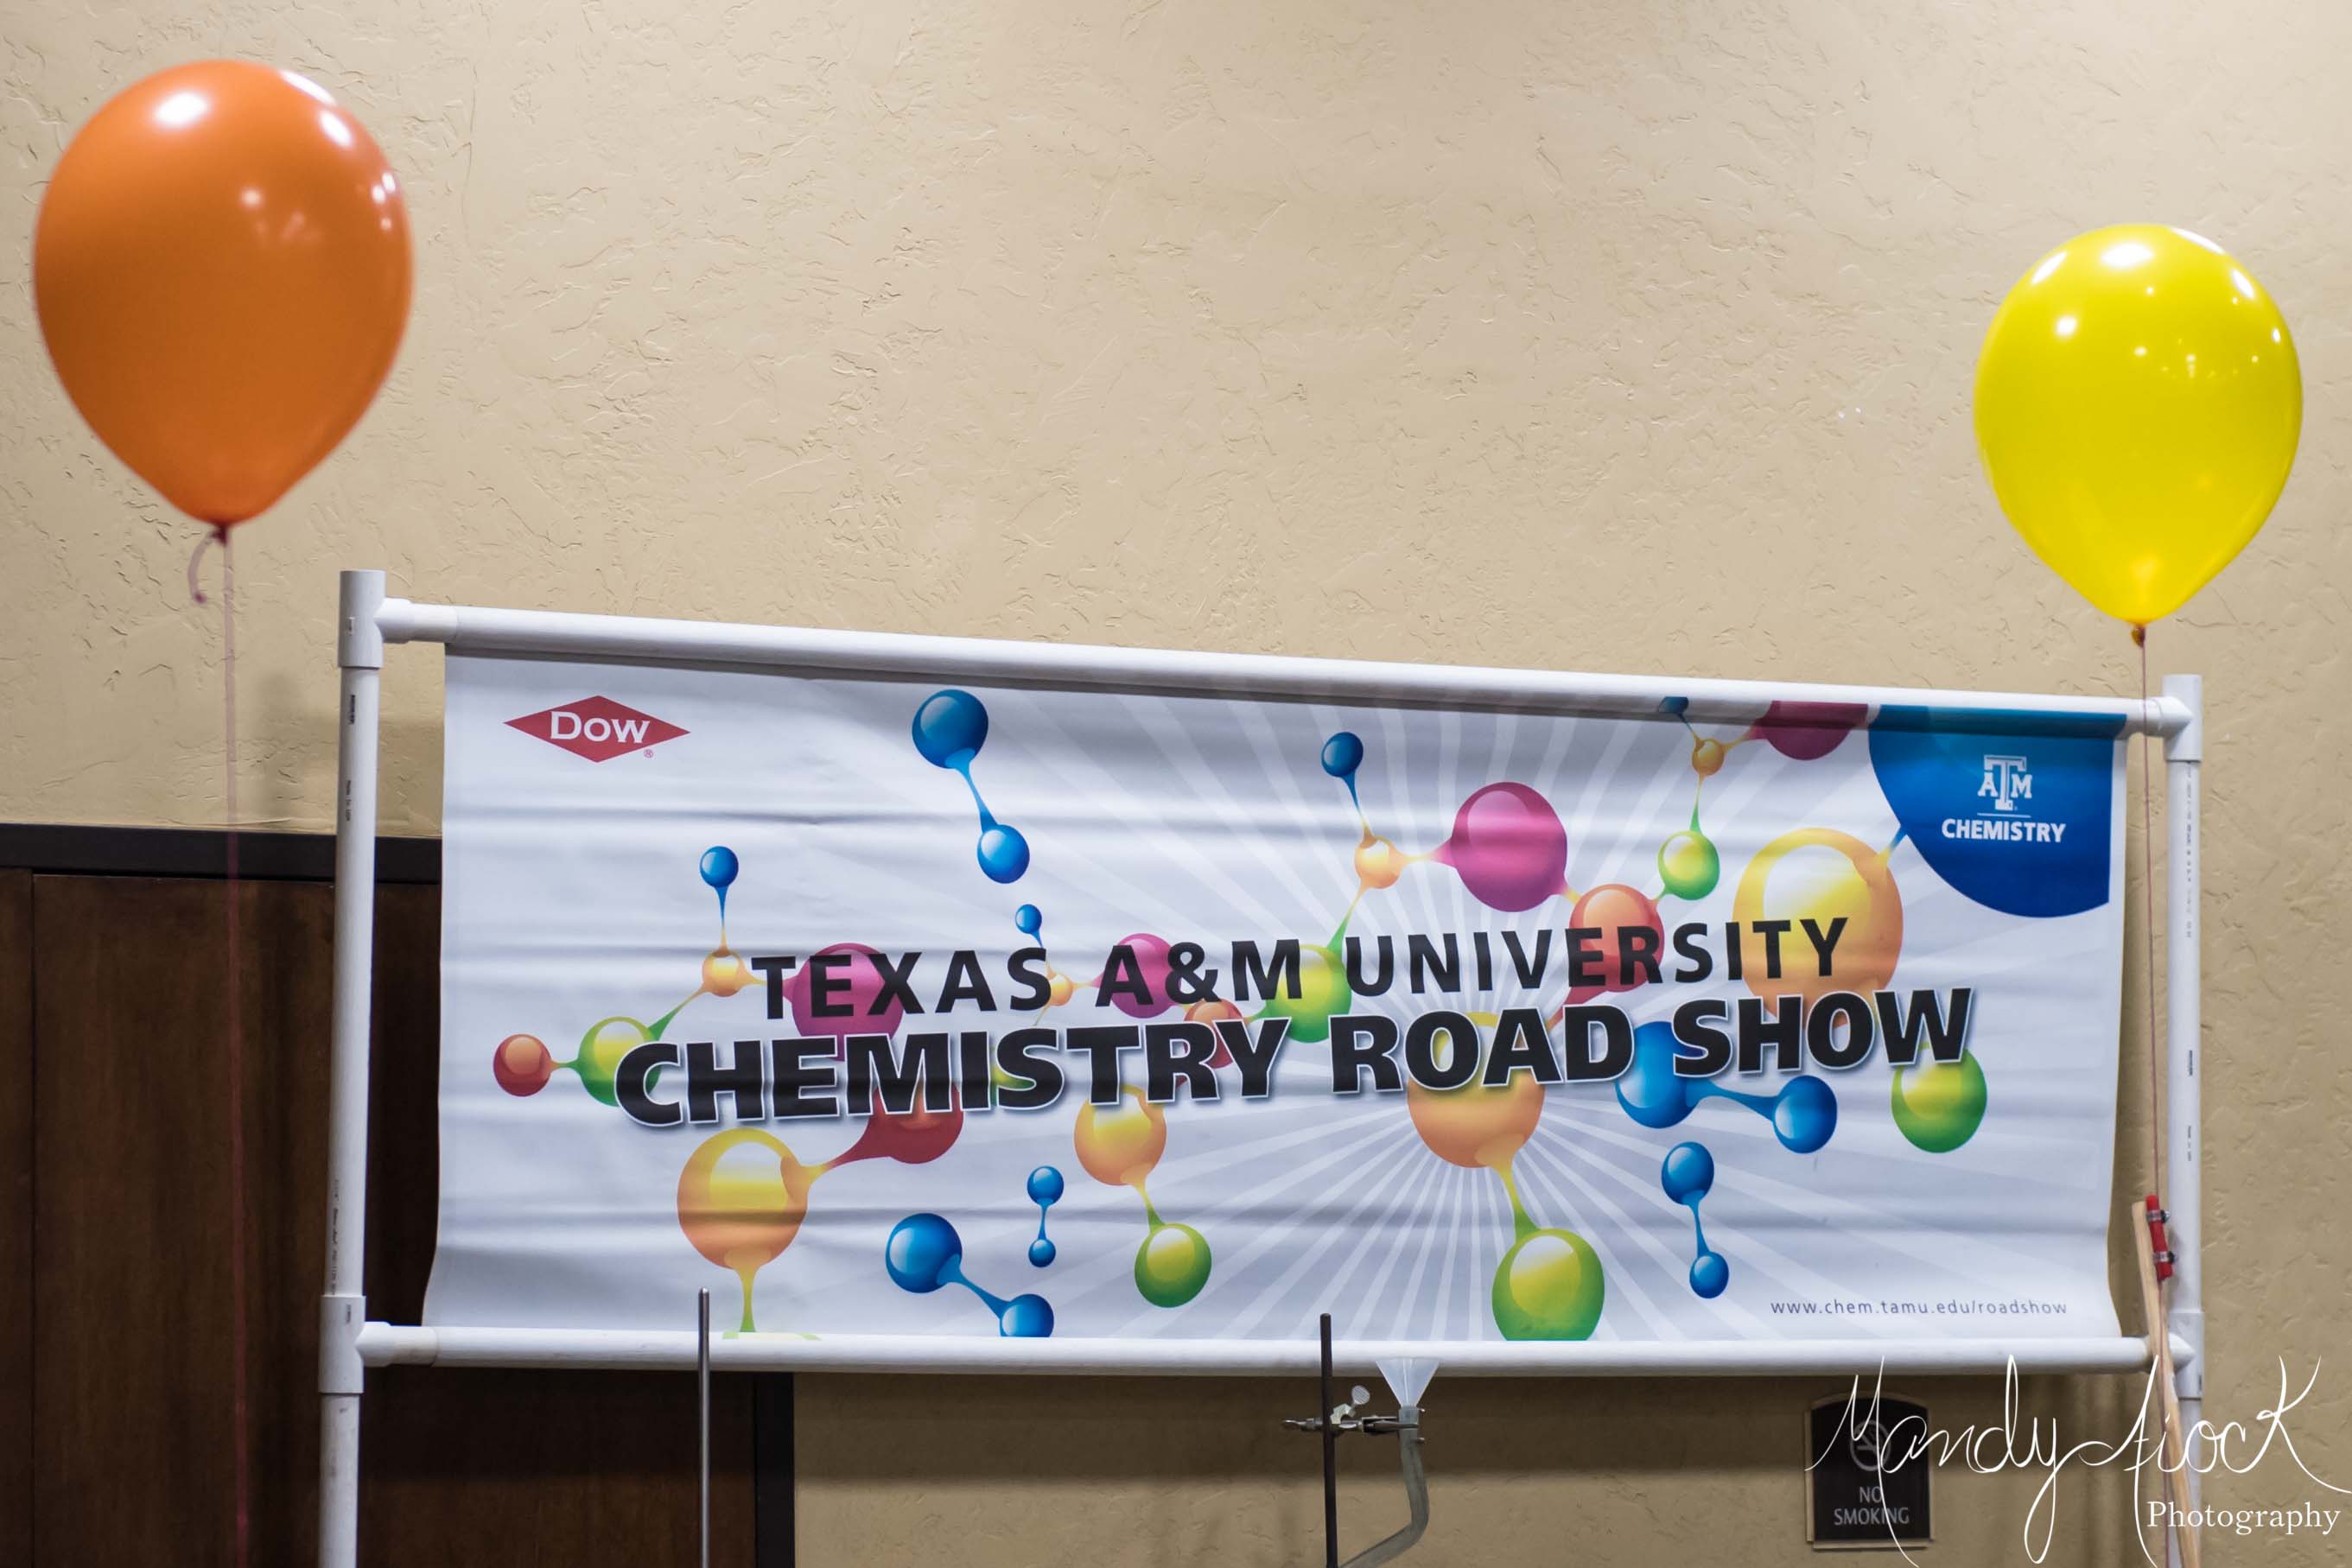 Photos from the Texas A&M University Chemistry Road Show by Mandy Fiock Photography